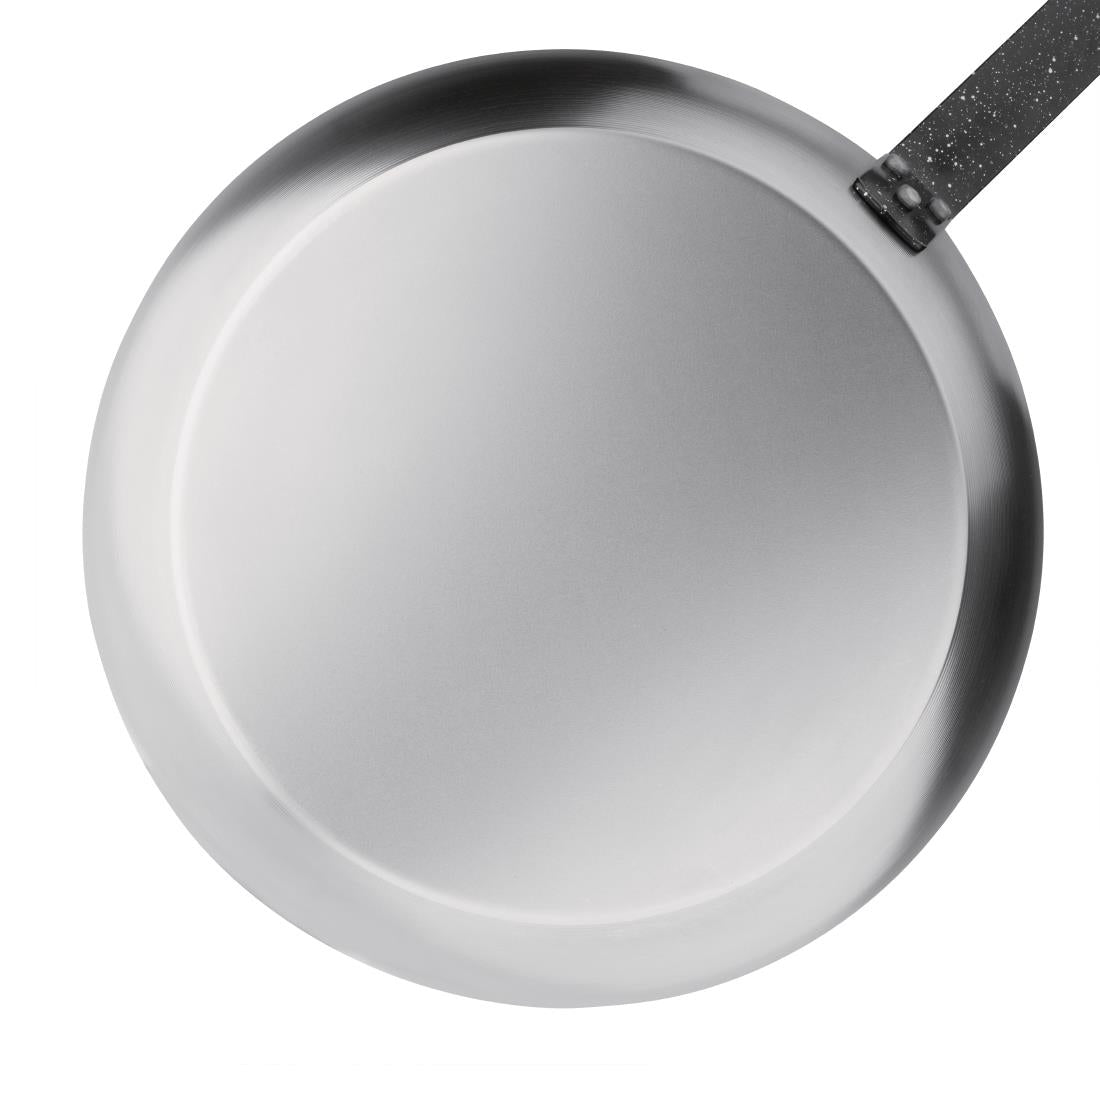 GD006 Vogue Carbon Steel Frying Pan 305mm JD Catering Equipment Solutions Ltd